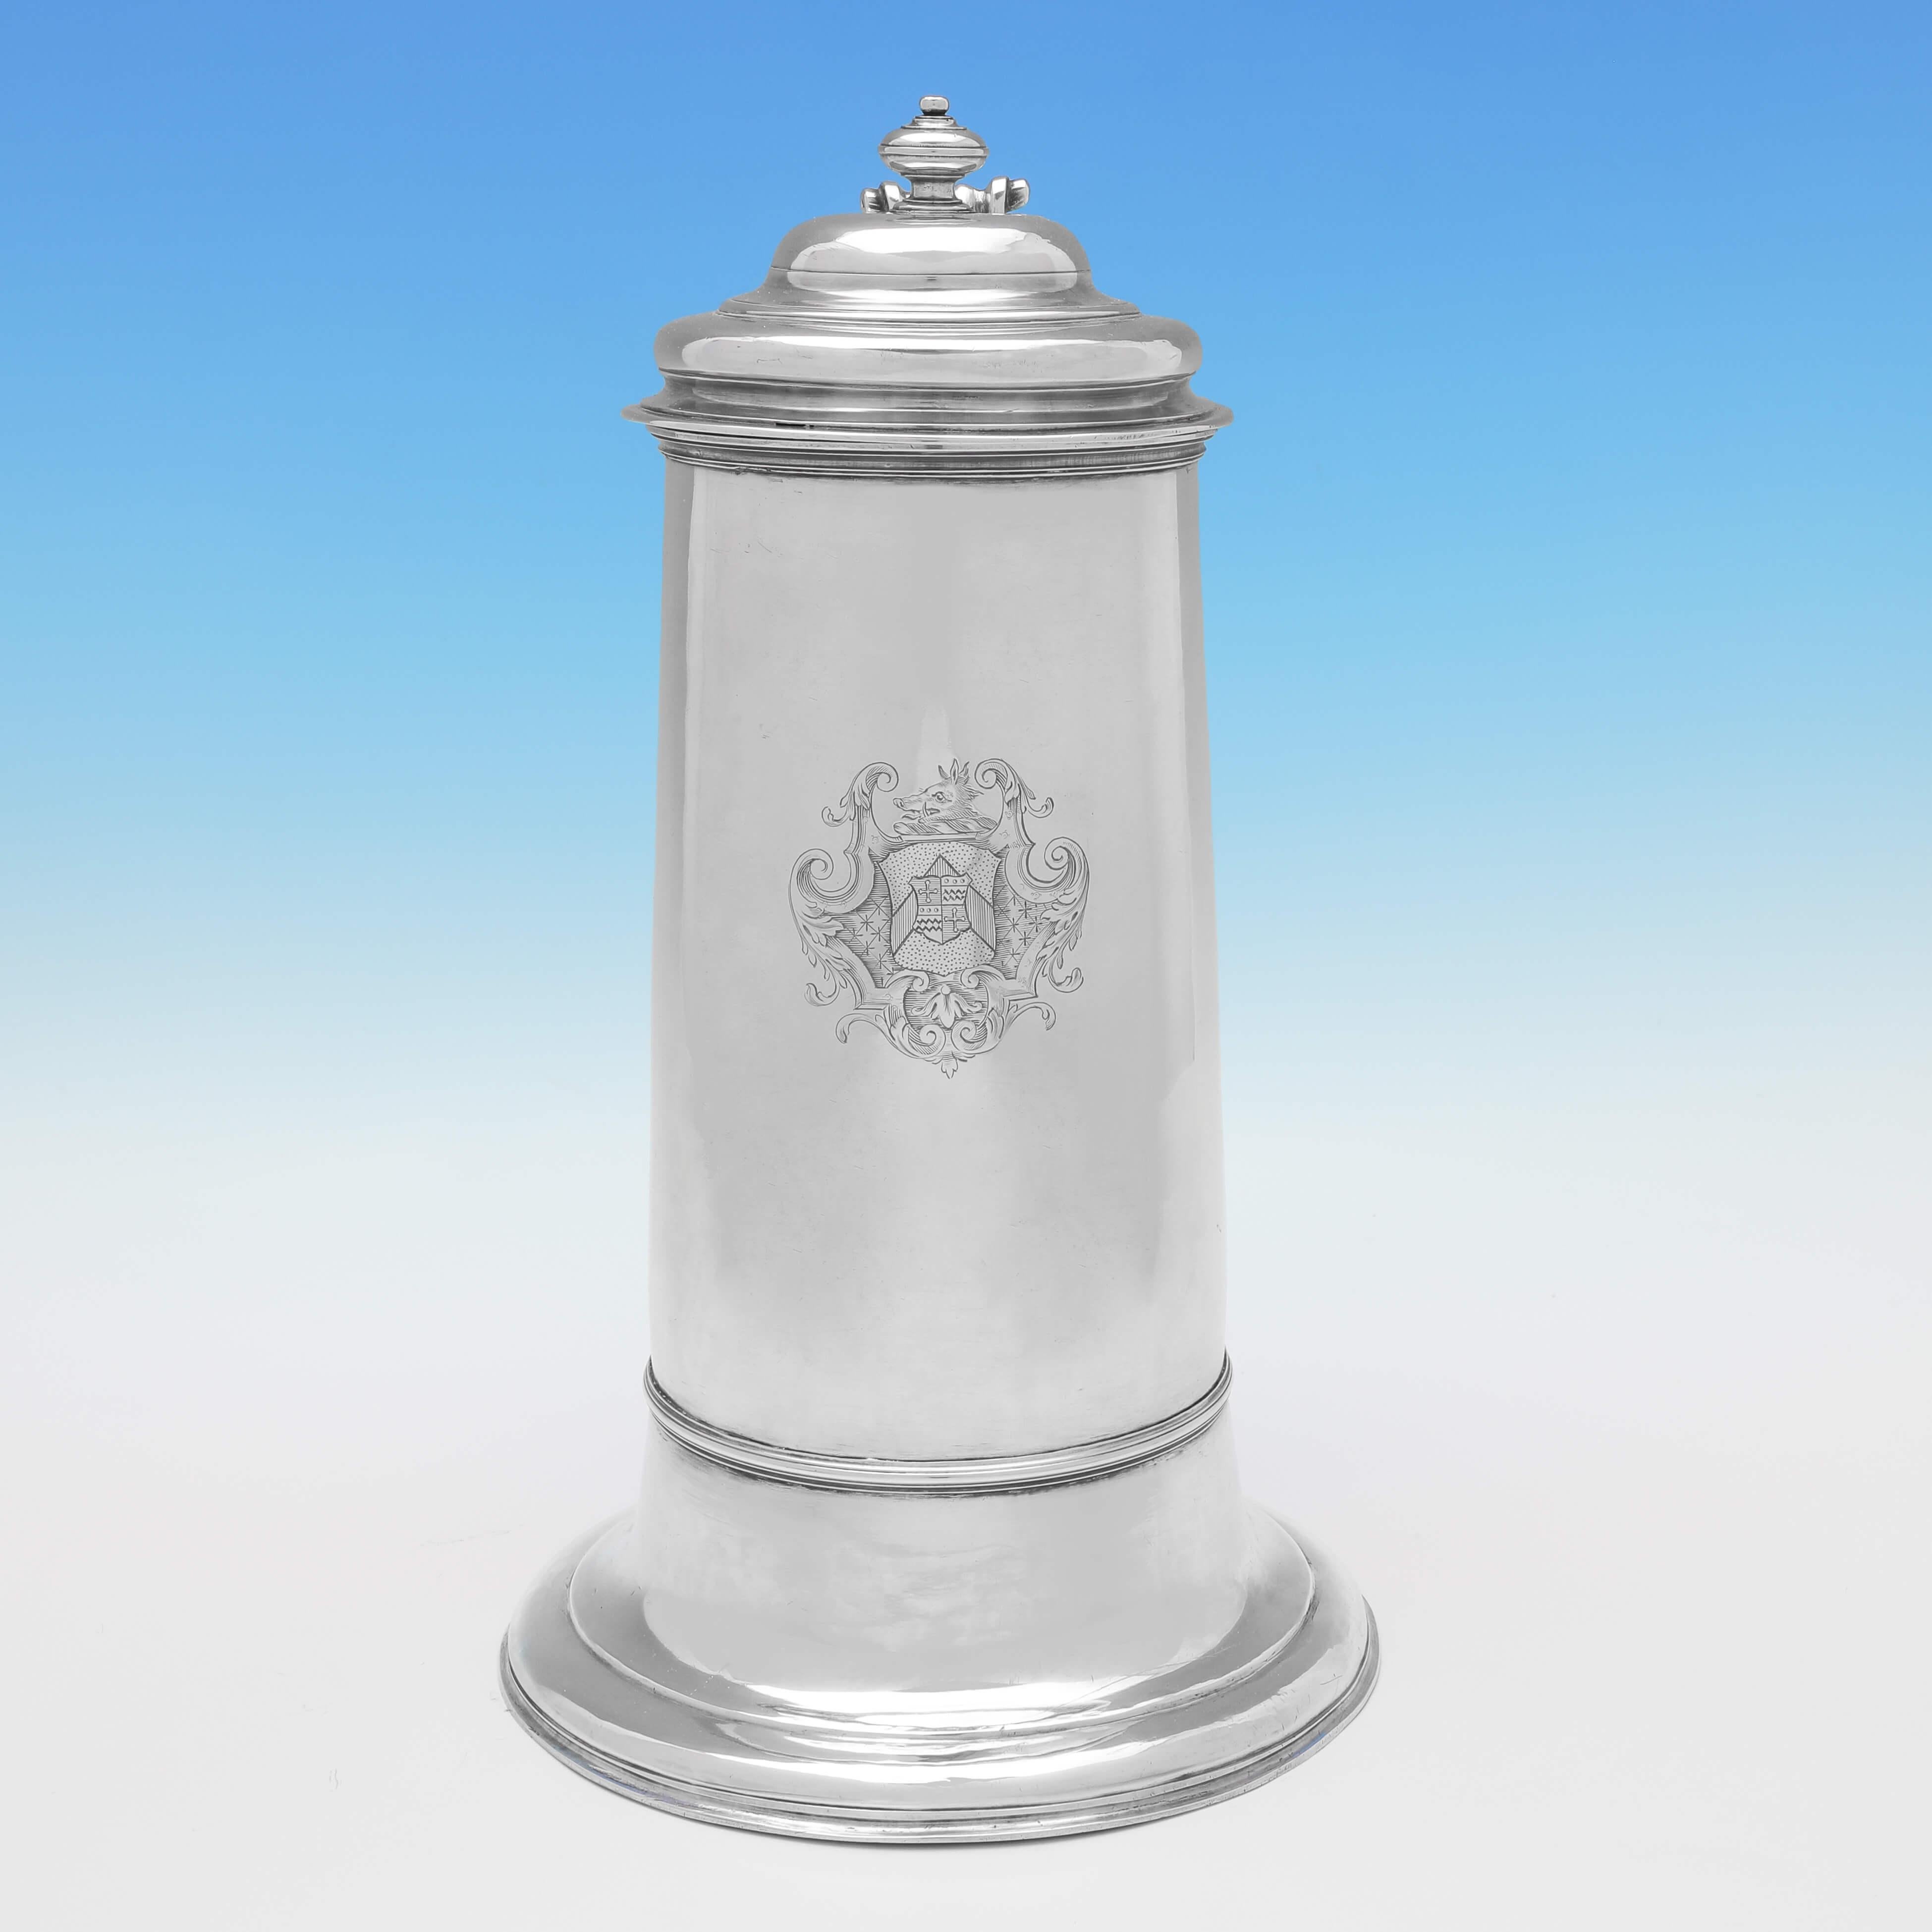 Hallmarked in London in 1730 by Thomas Tearle, this handsome, George II, antique silver flagon, stands on a flared base, and features a wonderfully engraved coat of arms. The flagon measures 13.75